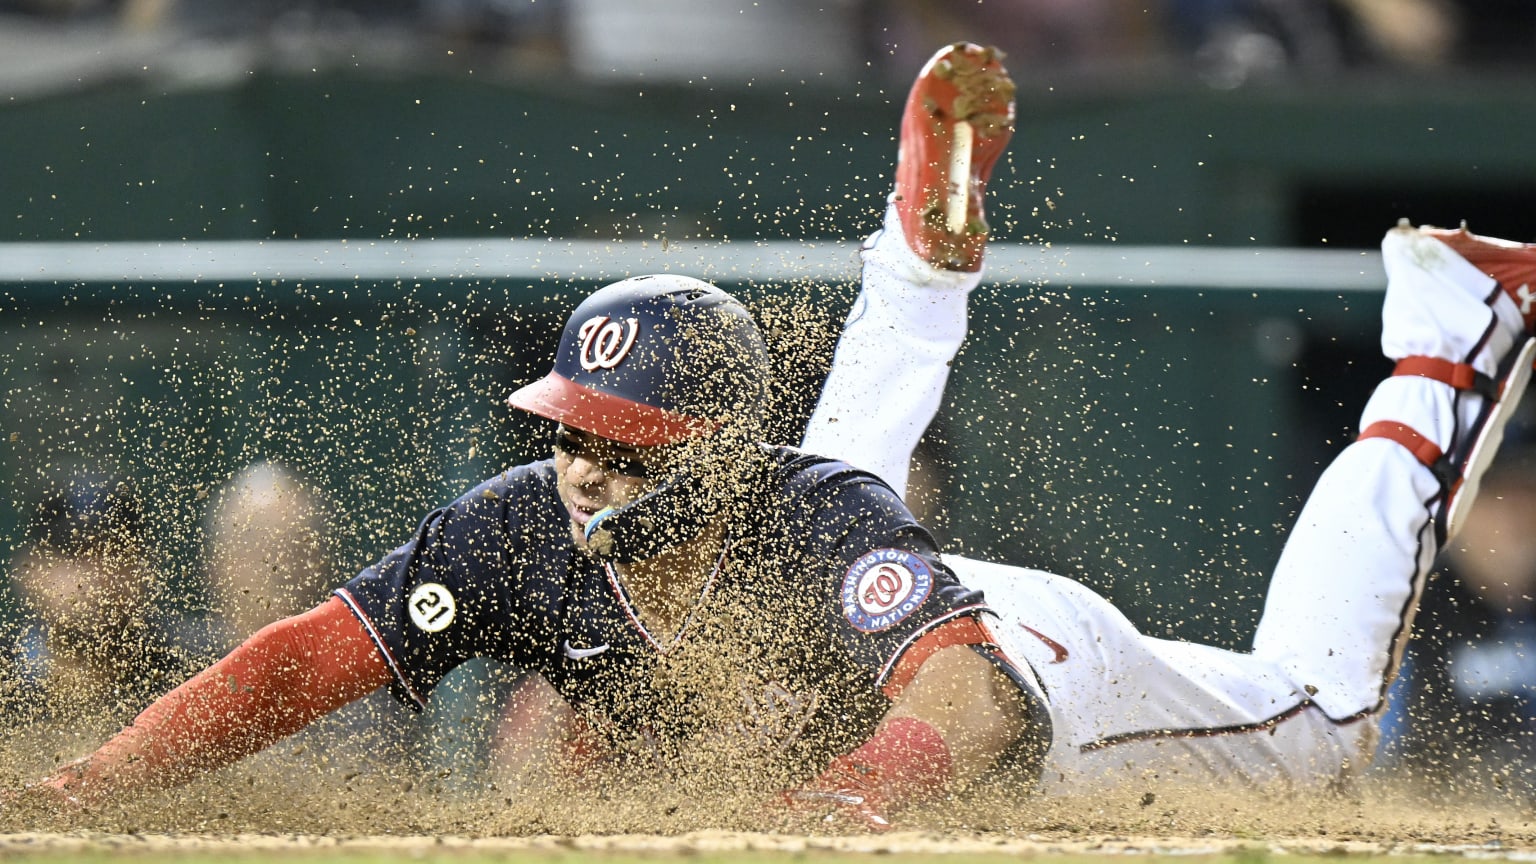 A player sliding head-first into home plate, dirt flying up around him